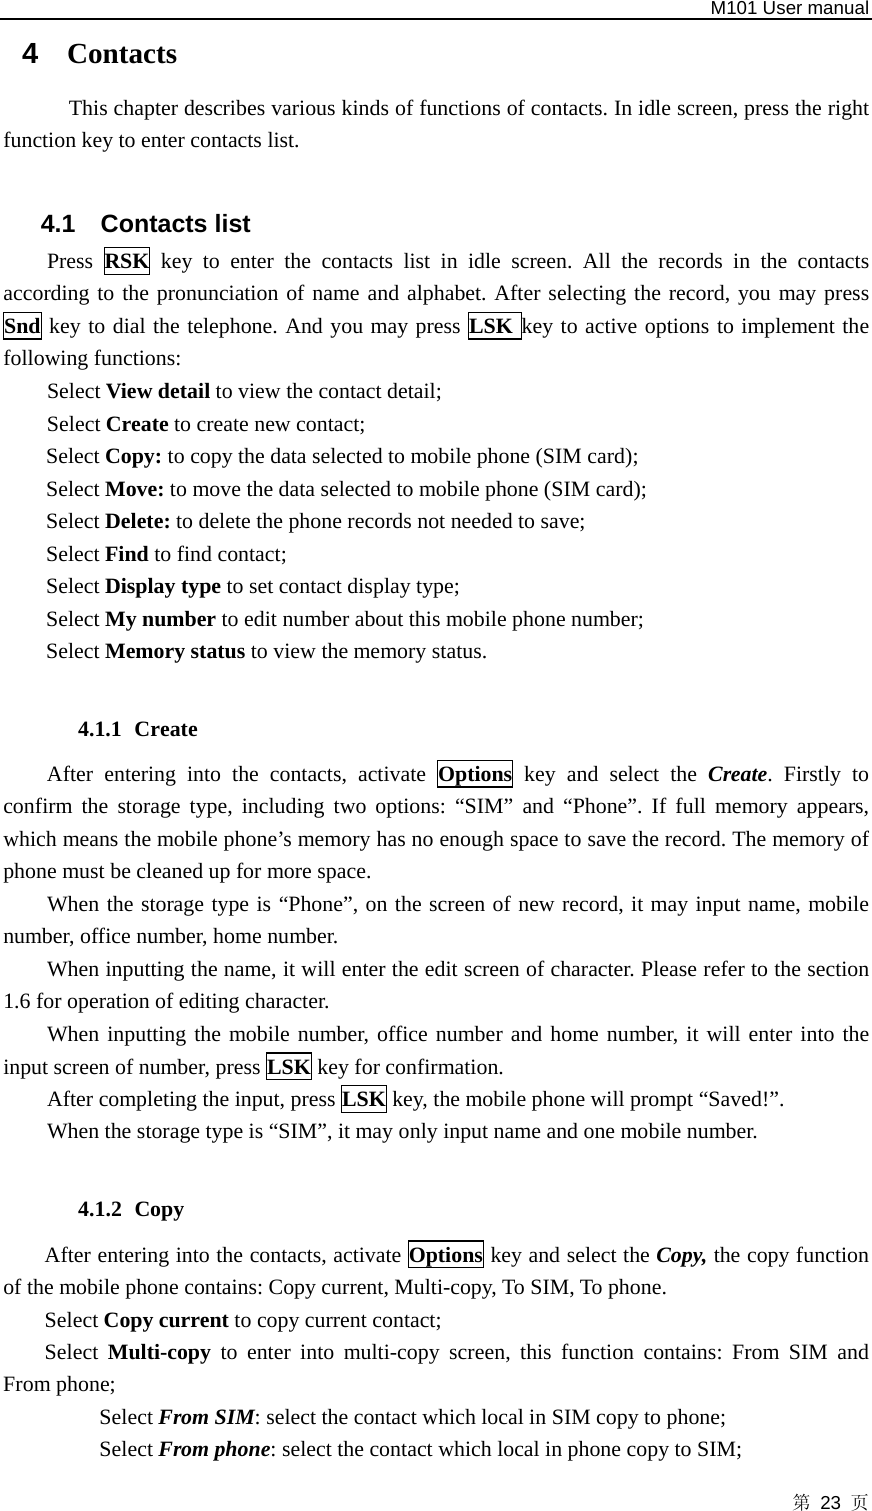   M101 User manual 第 23 页 4  Contacts This chapter describes various kinds of functions of contacts. In idle screen, press the right function key to enter contacts list.    4.1 Contacts list Press  RSK key to enter the contacts list in idle screen. All the records in the contacts according to the pronunciation of name and alphabet. After selecting the record, you may press Snd key to dial the telephone. And you may press LSK key to active options to implement the following functions: Select View detail to view the contact detail; Select Create to create new contact; Select Copy: to copy the data selected to mobile phone (SIM card); Select Move: to move the data selected to mobile phone (SIM card);   Select Delete: to delete the phone records not needed to save;   Select Find to find contact; Select Display type to set contact display type; Select My number to edit number about this mobile phone number; Select Memory status to view the memory status.  4.1.1 Create After entering into the contacts, activate Options key and select the Create. Firstly to confirm the storage type, including two options: “SIM” and “Phone”. If full memory appears, which means the mobile phone’s memory has no enough space to save the record. The memory of phone must be cleaned up for more space.   When the storage type is “Phone”, on the screen of new record, it may input name, mobile number, office number, home number. When inputting the name, it will enter the edit screen of character. Please refer to the section 1.6 for operation of editing character.   When inputting the mobile number, office number and home number, it will enter into the input screen of number, press LSK key for confirmation.   After completing the input, press LSK key, the mobile phone will prompt “Saved!”.   When the storage type is “SIM”, it may only input name and one mobile number.  4.1.2 Copy After entering into the contacts, activate Options key and select the Copy, the copy function of the mobile phone contains: Copy current, Multi-copy, To SIM, To phone.   Select Copy current to copy current contact;   Select  Multi-copy  to enter into multi-copy screen, this function contains: From SIM and From phone; Select From SIM: select the contact which local in SIM copy to phone; Select From phone: select the contact which local in phone copy to SIM; 